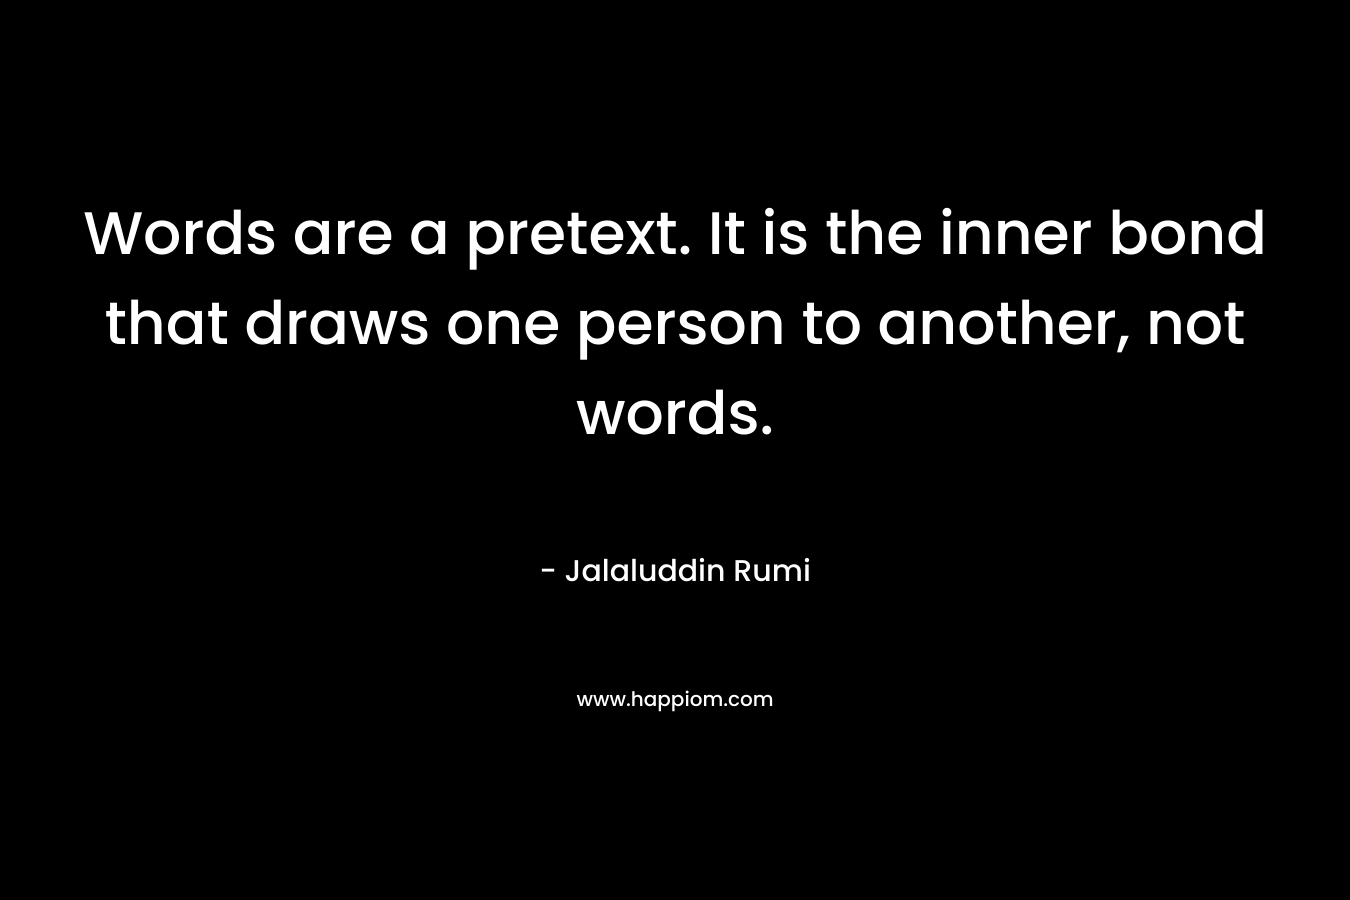 Words are a pretext. It is the inner bond that draws one person to another, not words. – Jalaluddin Rumi